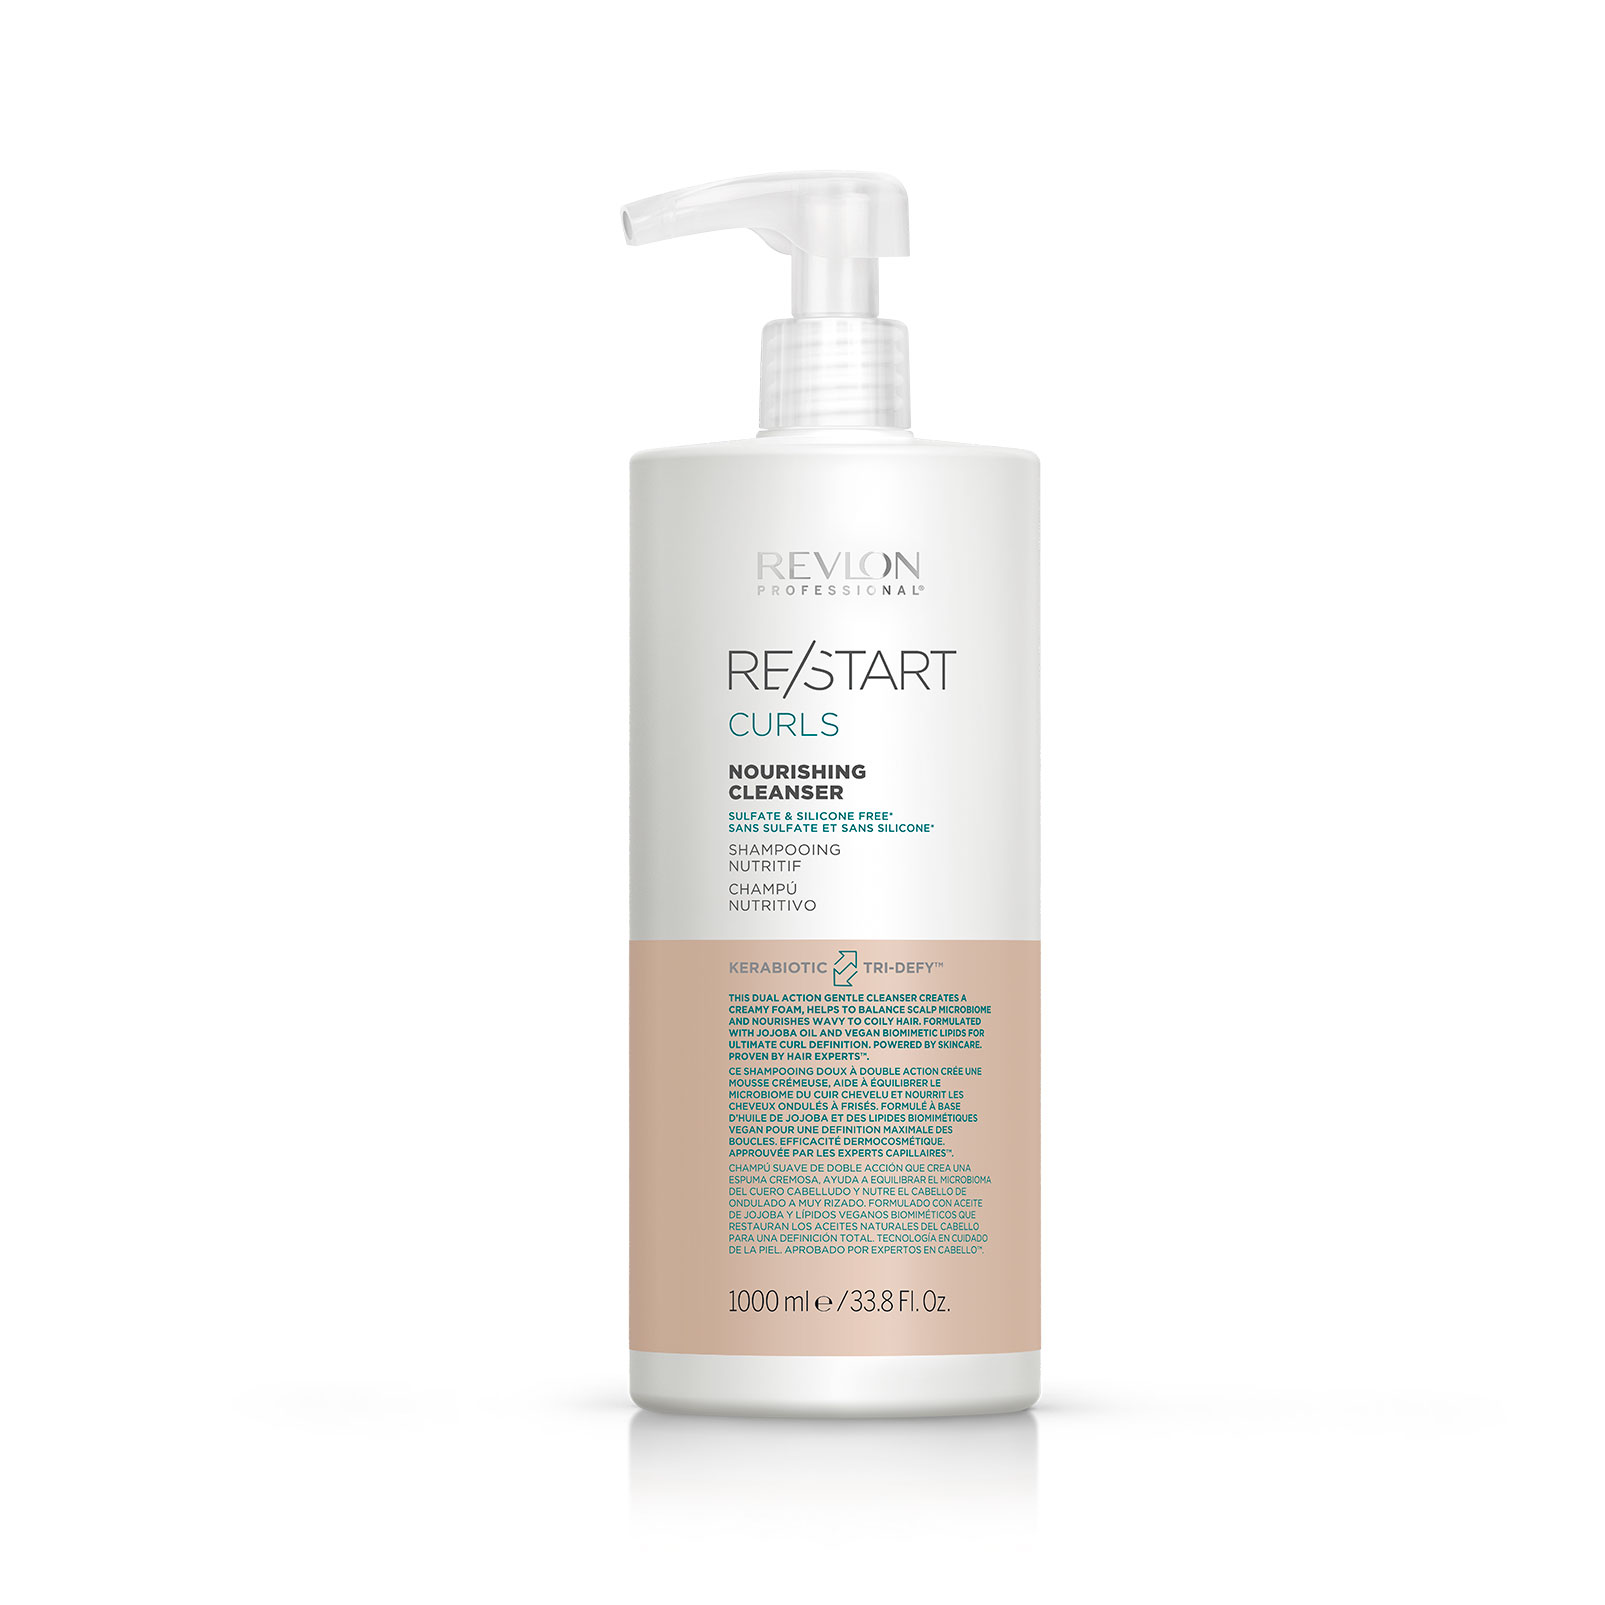 RE/START™ cleanser for curly coily Professional - hair Revlon and